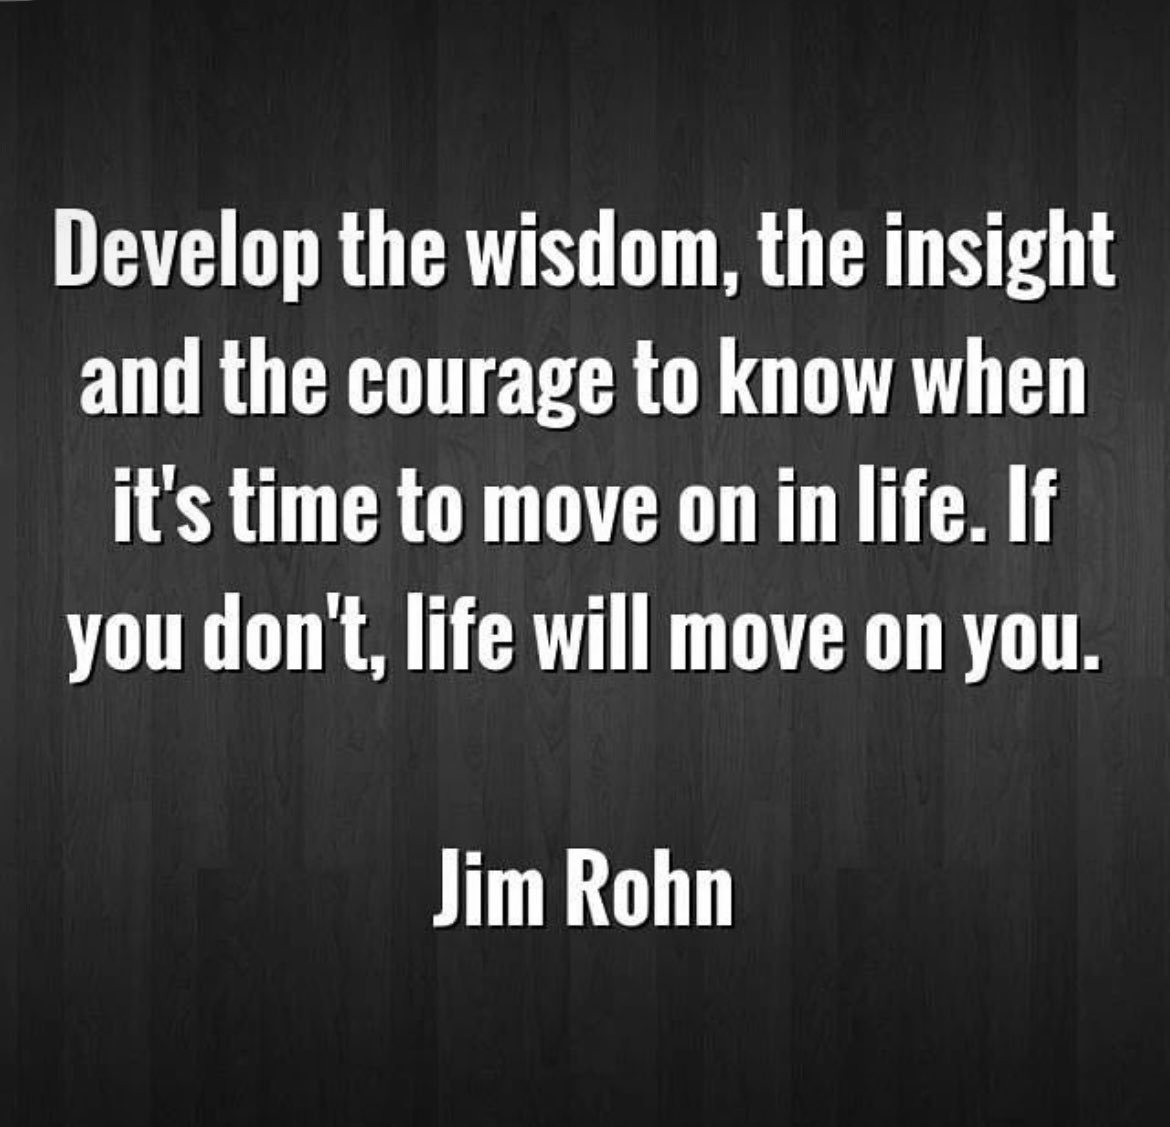 There’s an old song, “know when to hold’em, know when to fold’em, know when to walk away.” It’s also been said, “if any of you lacks wisdom, …ask…” Your ability to move forward in life, will take time..to grow, to mature, gain knowledge, wisdom and discernment. #ItsTIMEToManUp